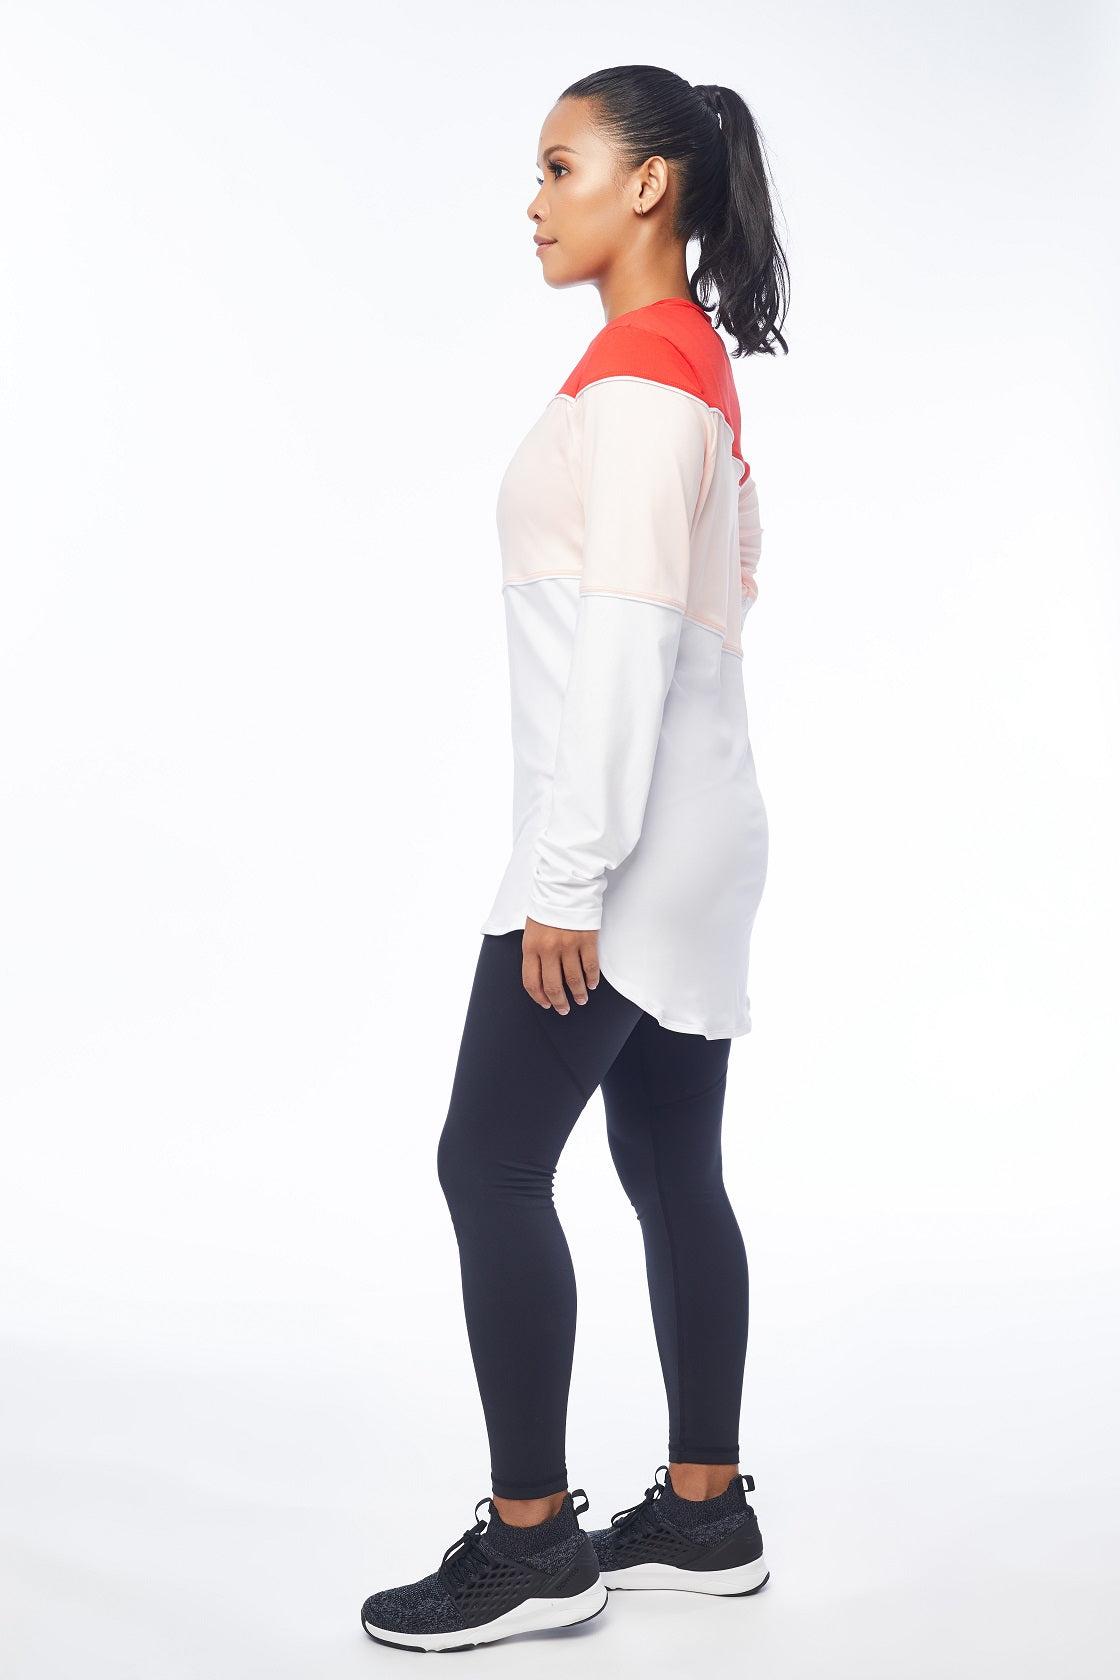 LEAP FREE Long Sleeve Top (Red / Pink / White)